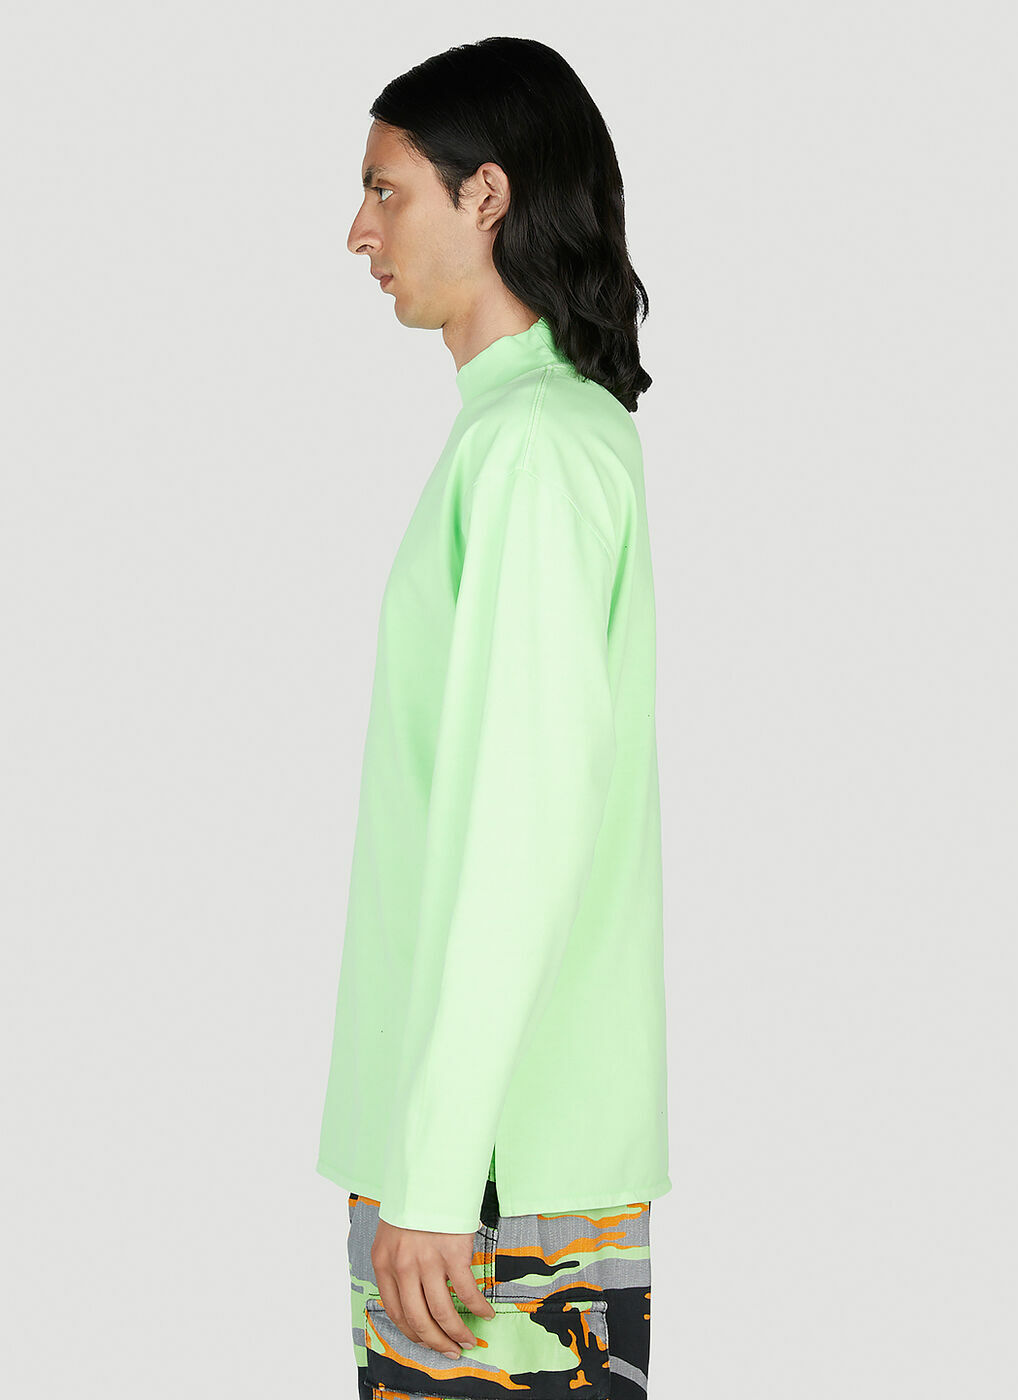 ERL - Long Sleeve T-Shirt in Green ERL